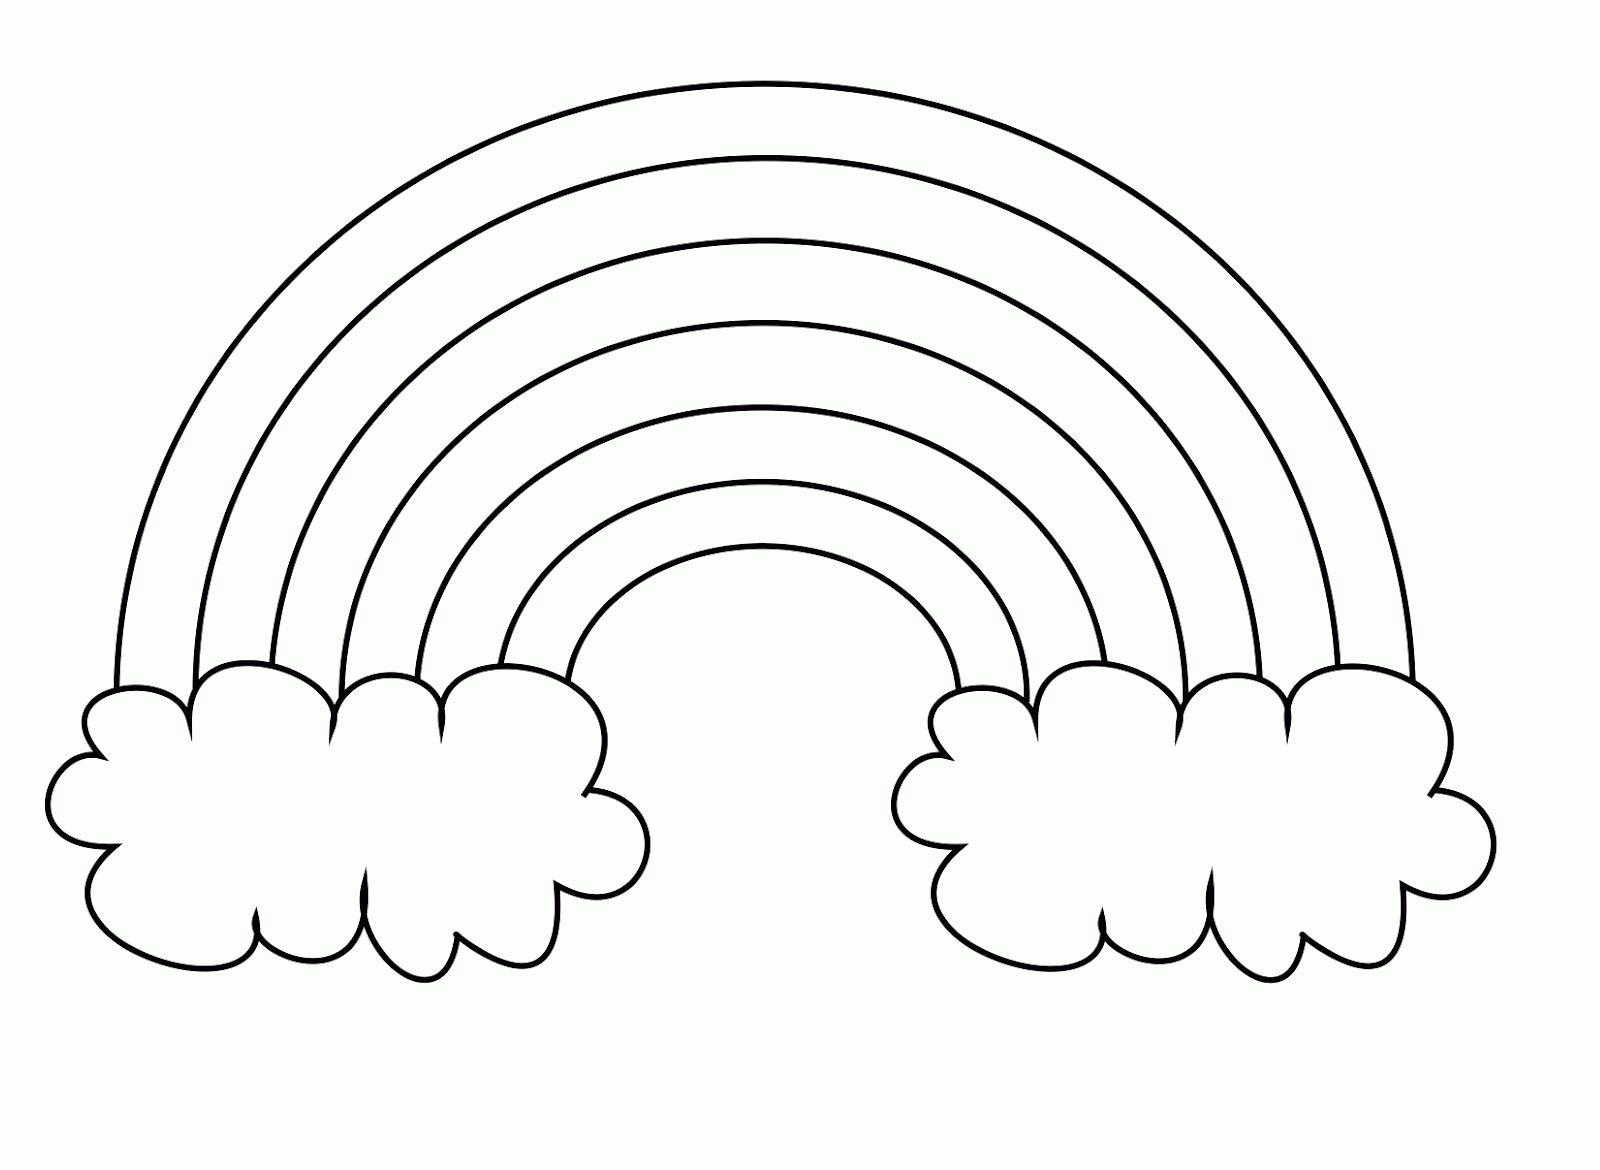 Coloring Pages Of Rainbows (18 Pictures) - Colorine.net | 5594